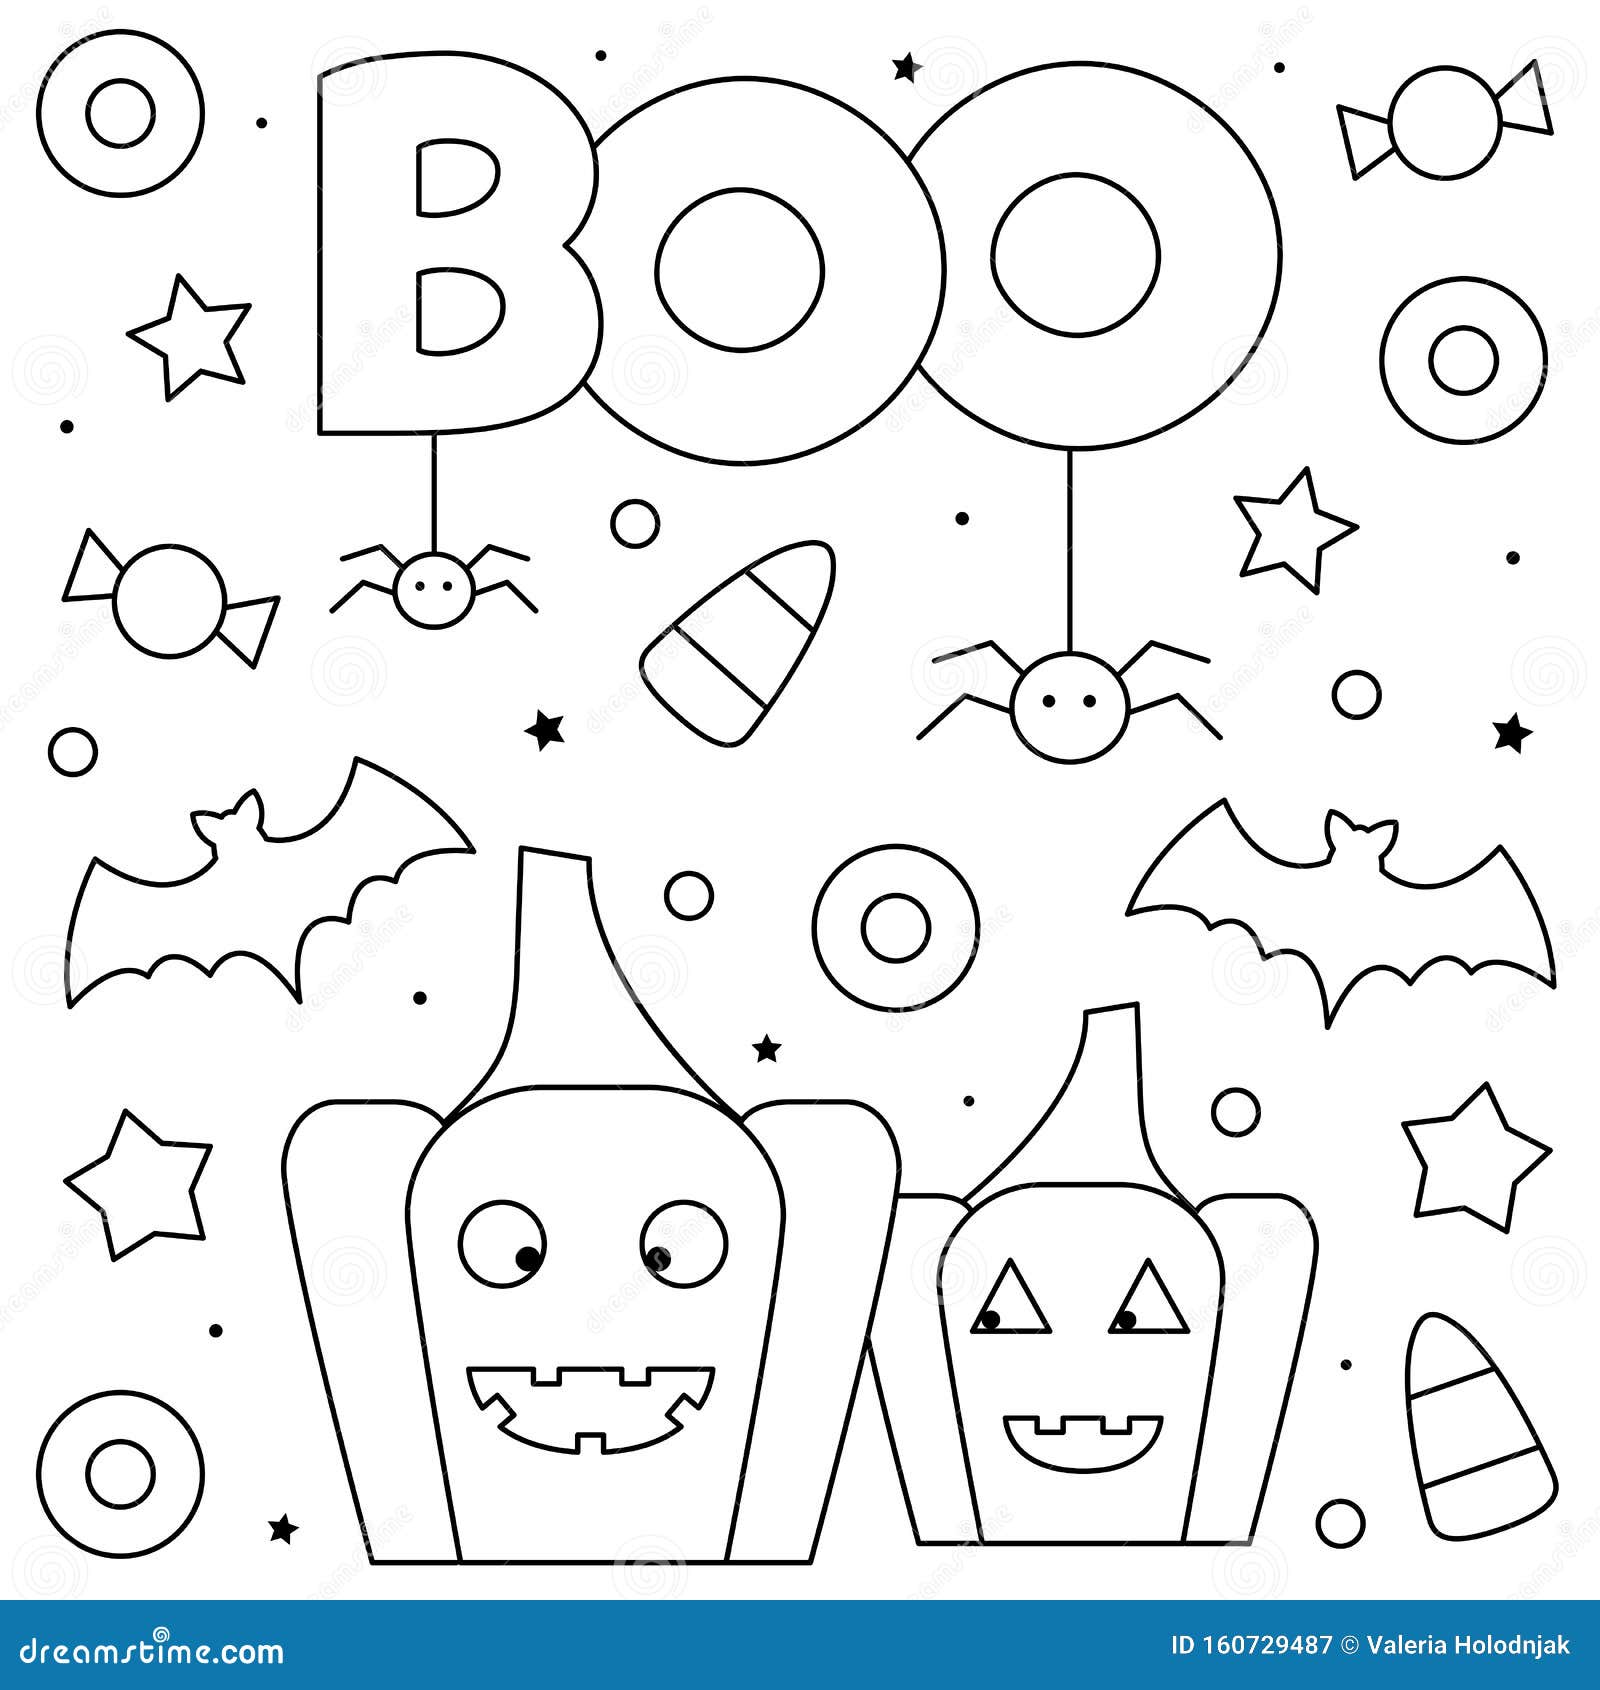 Coloring Page. Black and White Vector Illustration Stock Vector ...